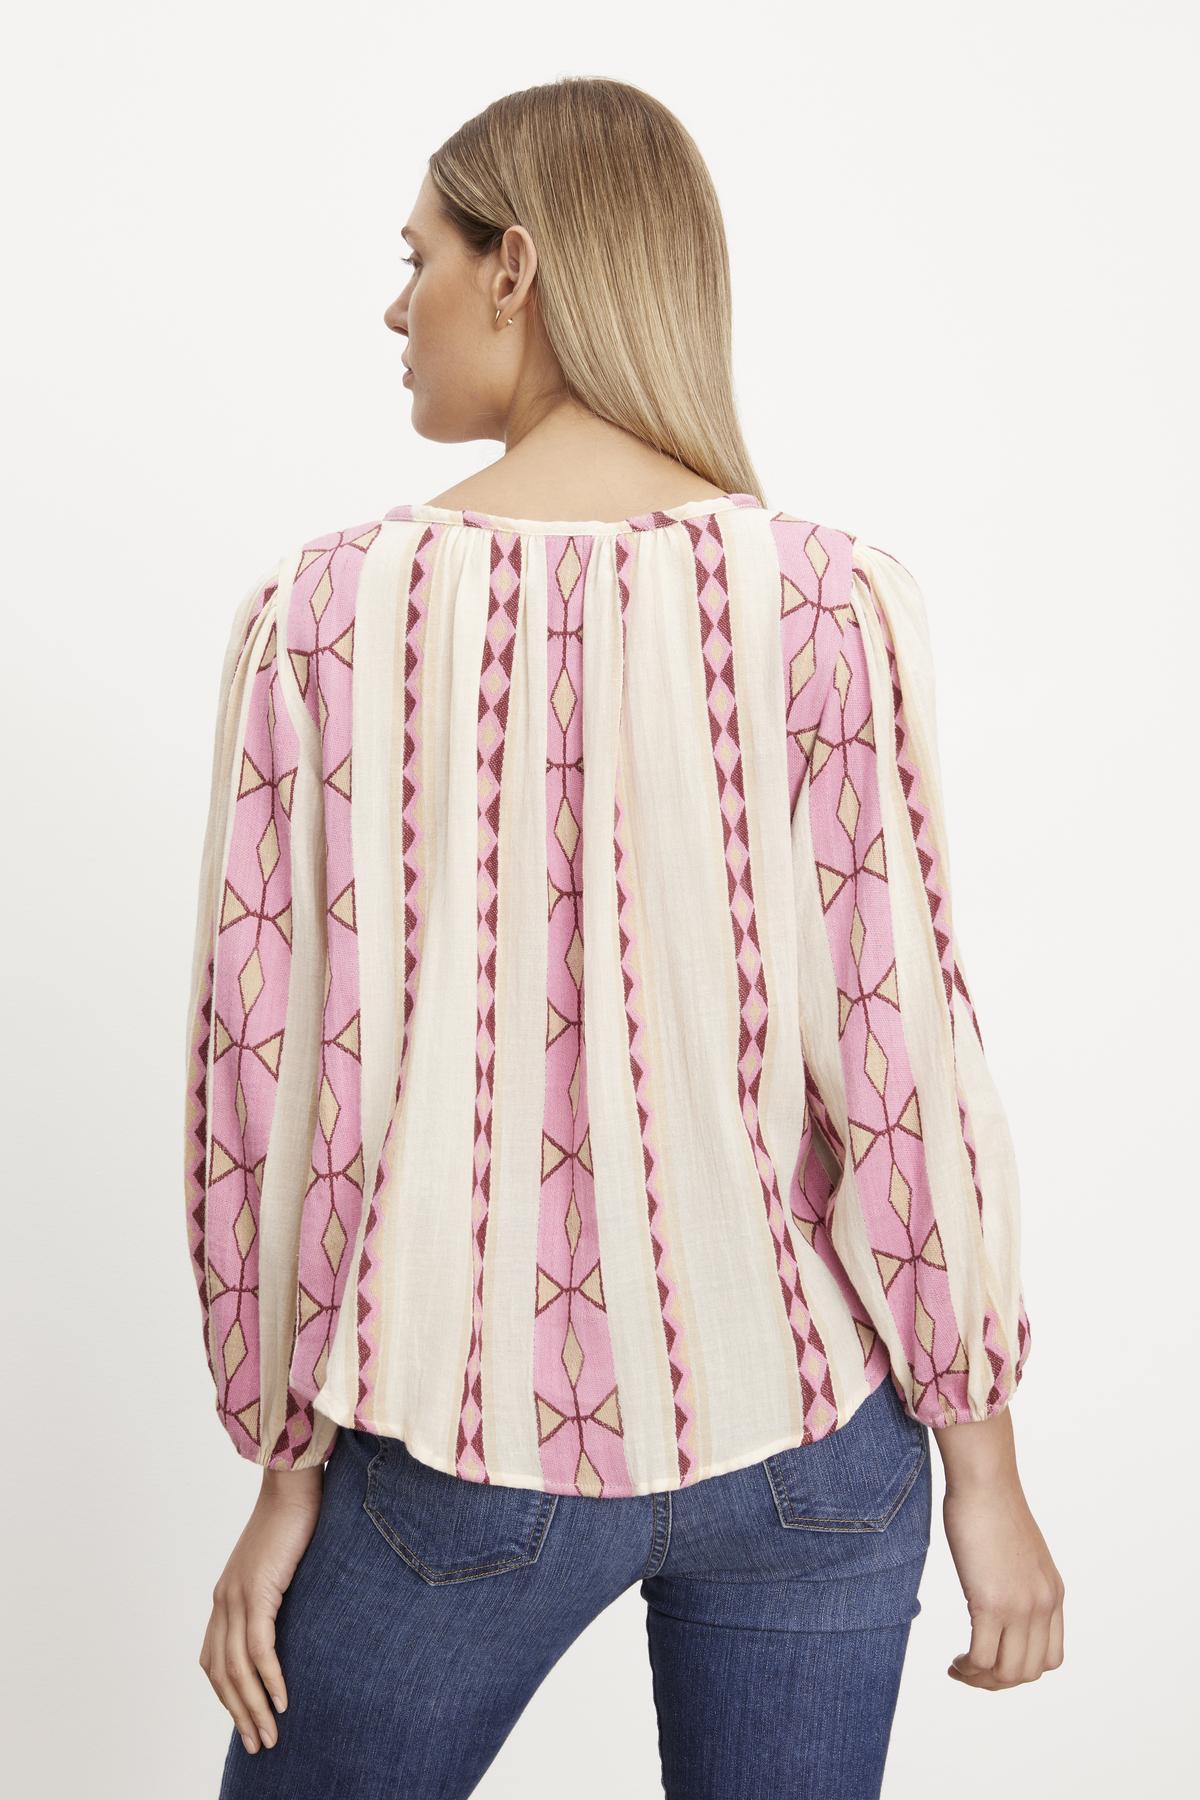 The woman is wearing a pink embroidered blouse with elastic cuffs from Velvet by Graham & Spencer.-36220815802561